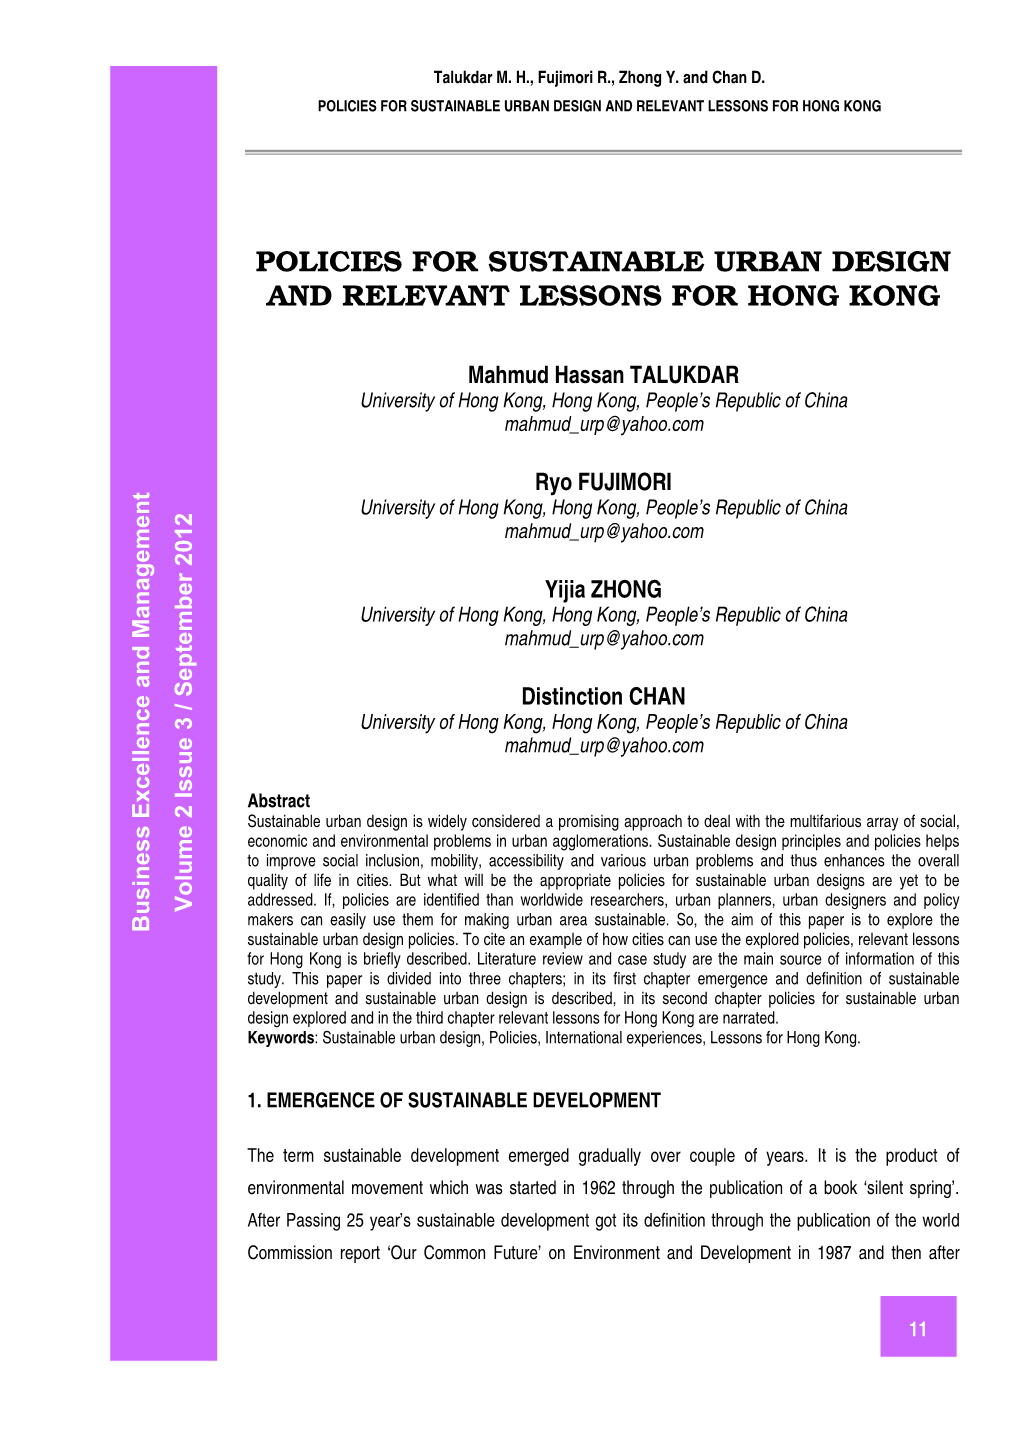 Policies for Sustainable Urban Design and Relevant Lessons for Hong Kong